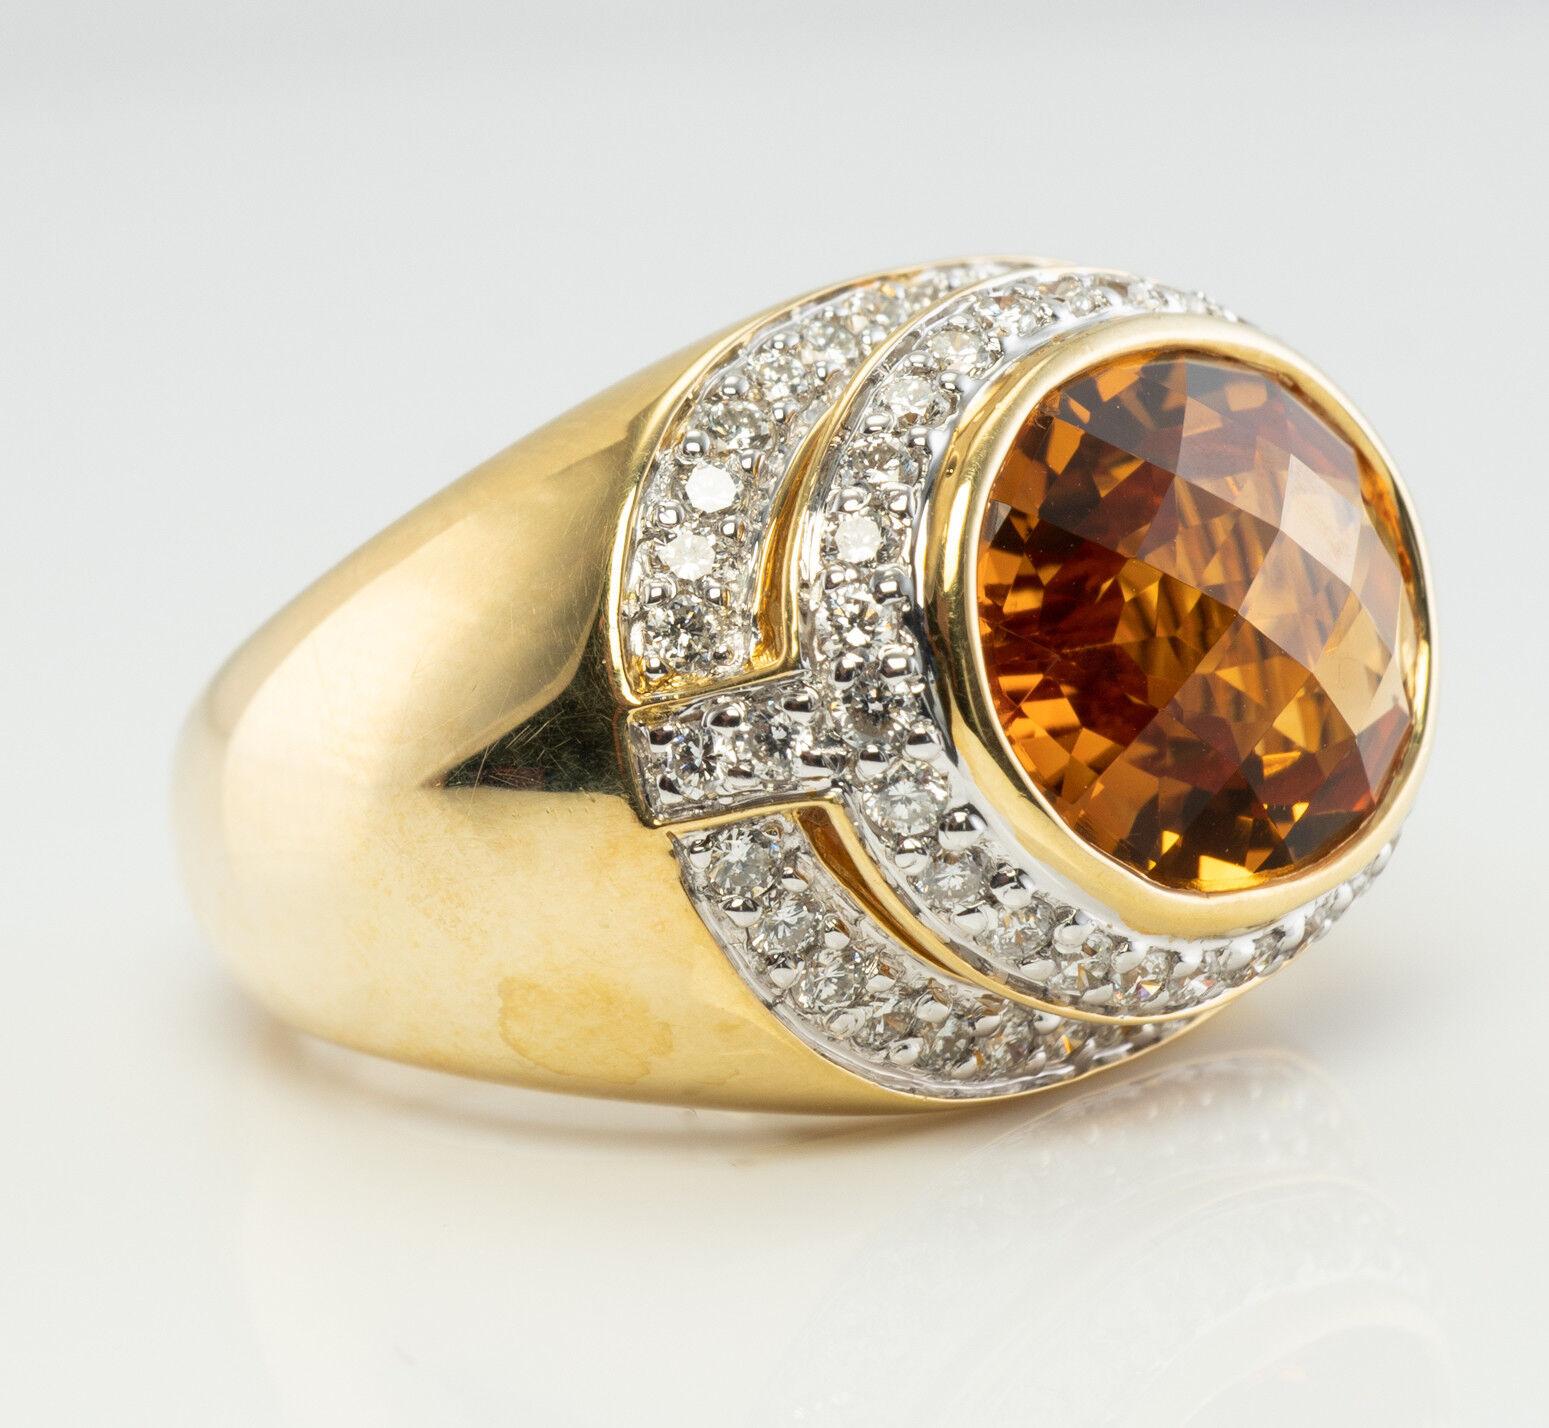 Kristina Diamond Citrine Ring 18K Gold Band

This extraordinary ring is made by New York designer Kristina. The ring is crafted in solid 18K Yellow Gold and set with genuine Earth mined Citrine and dazzling white diamonds. The center checkerboard